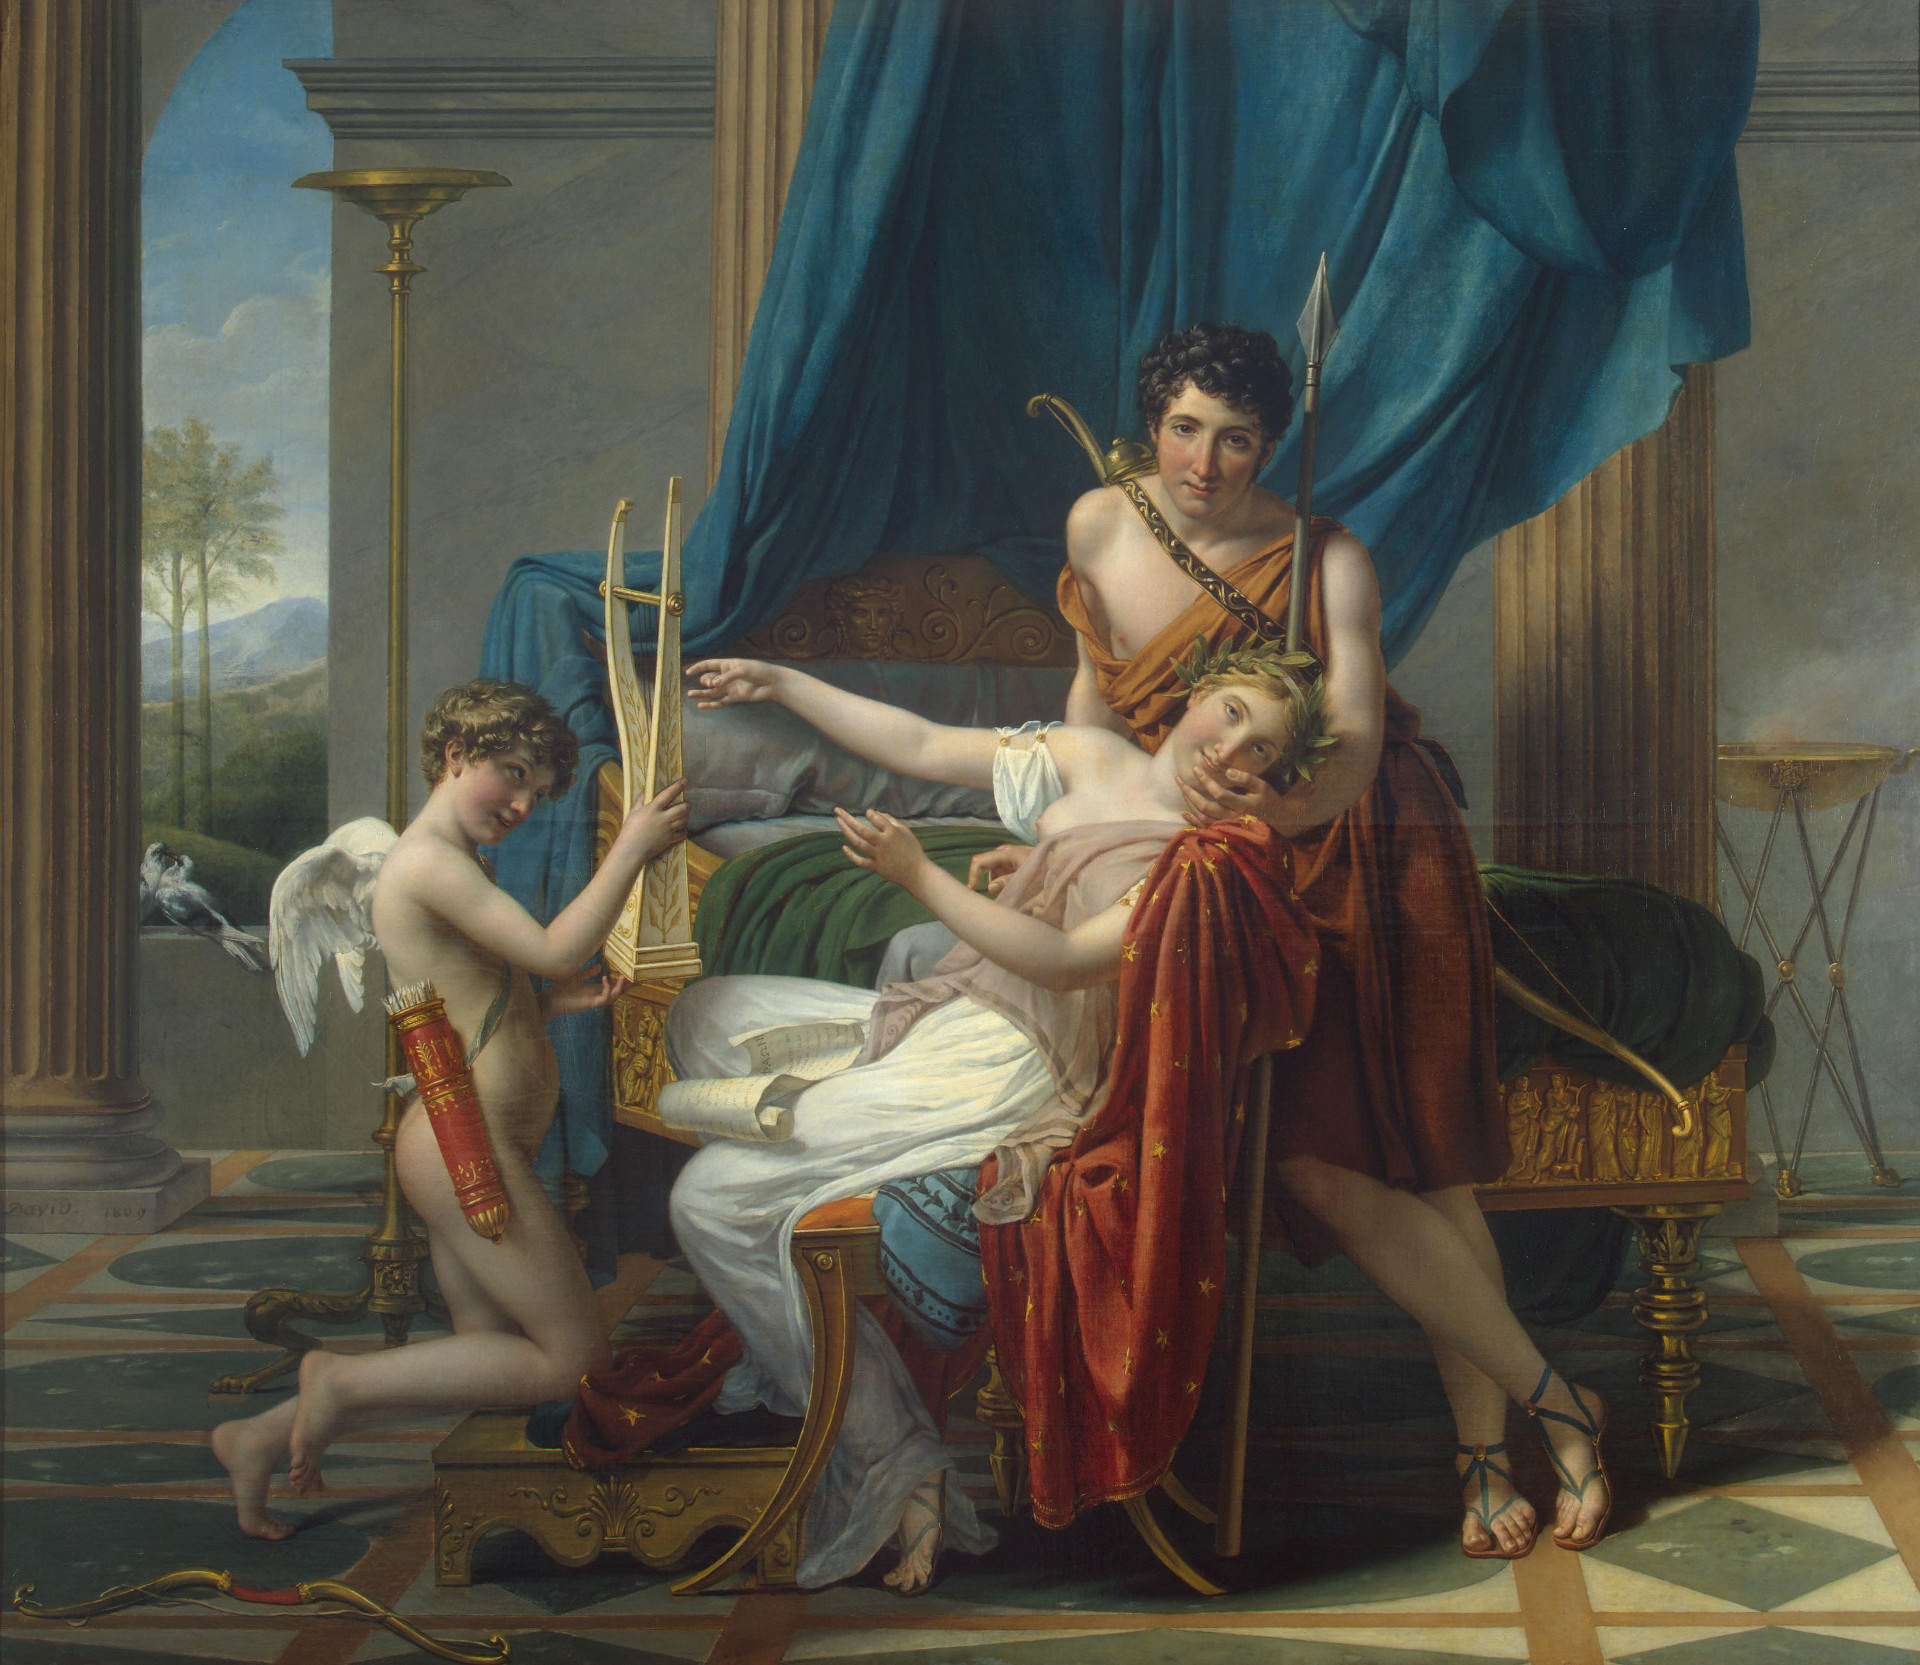 Fig. 4 – David, Jacques-Louis. Sappho and Phaon. France 1809. Oil on canvas 225.3 x 262 cm. Inv. no. GE-5668. Crédito: The State Hermitage Museum, St. Petersburg.